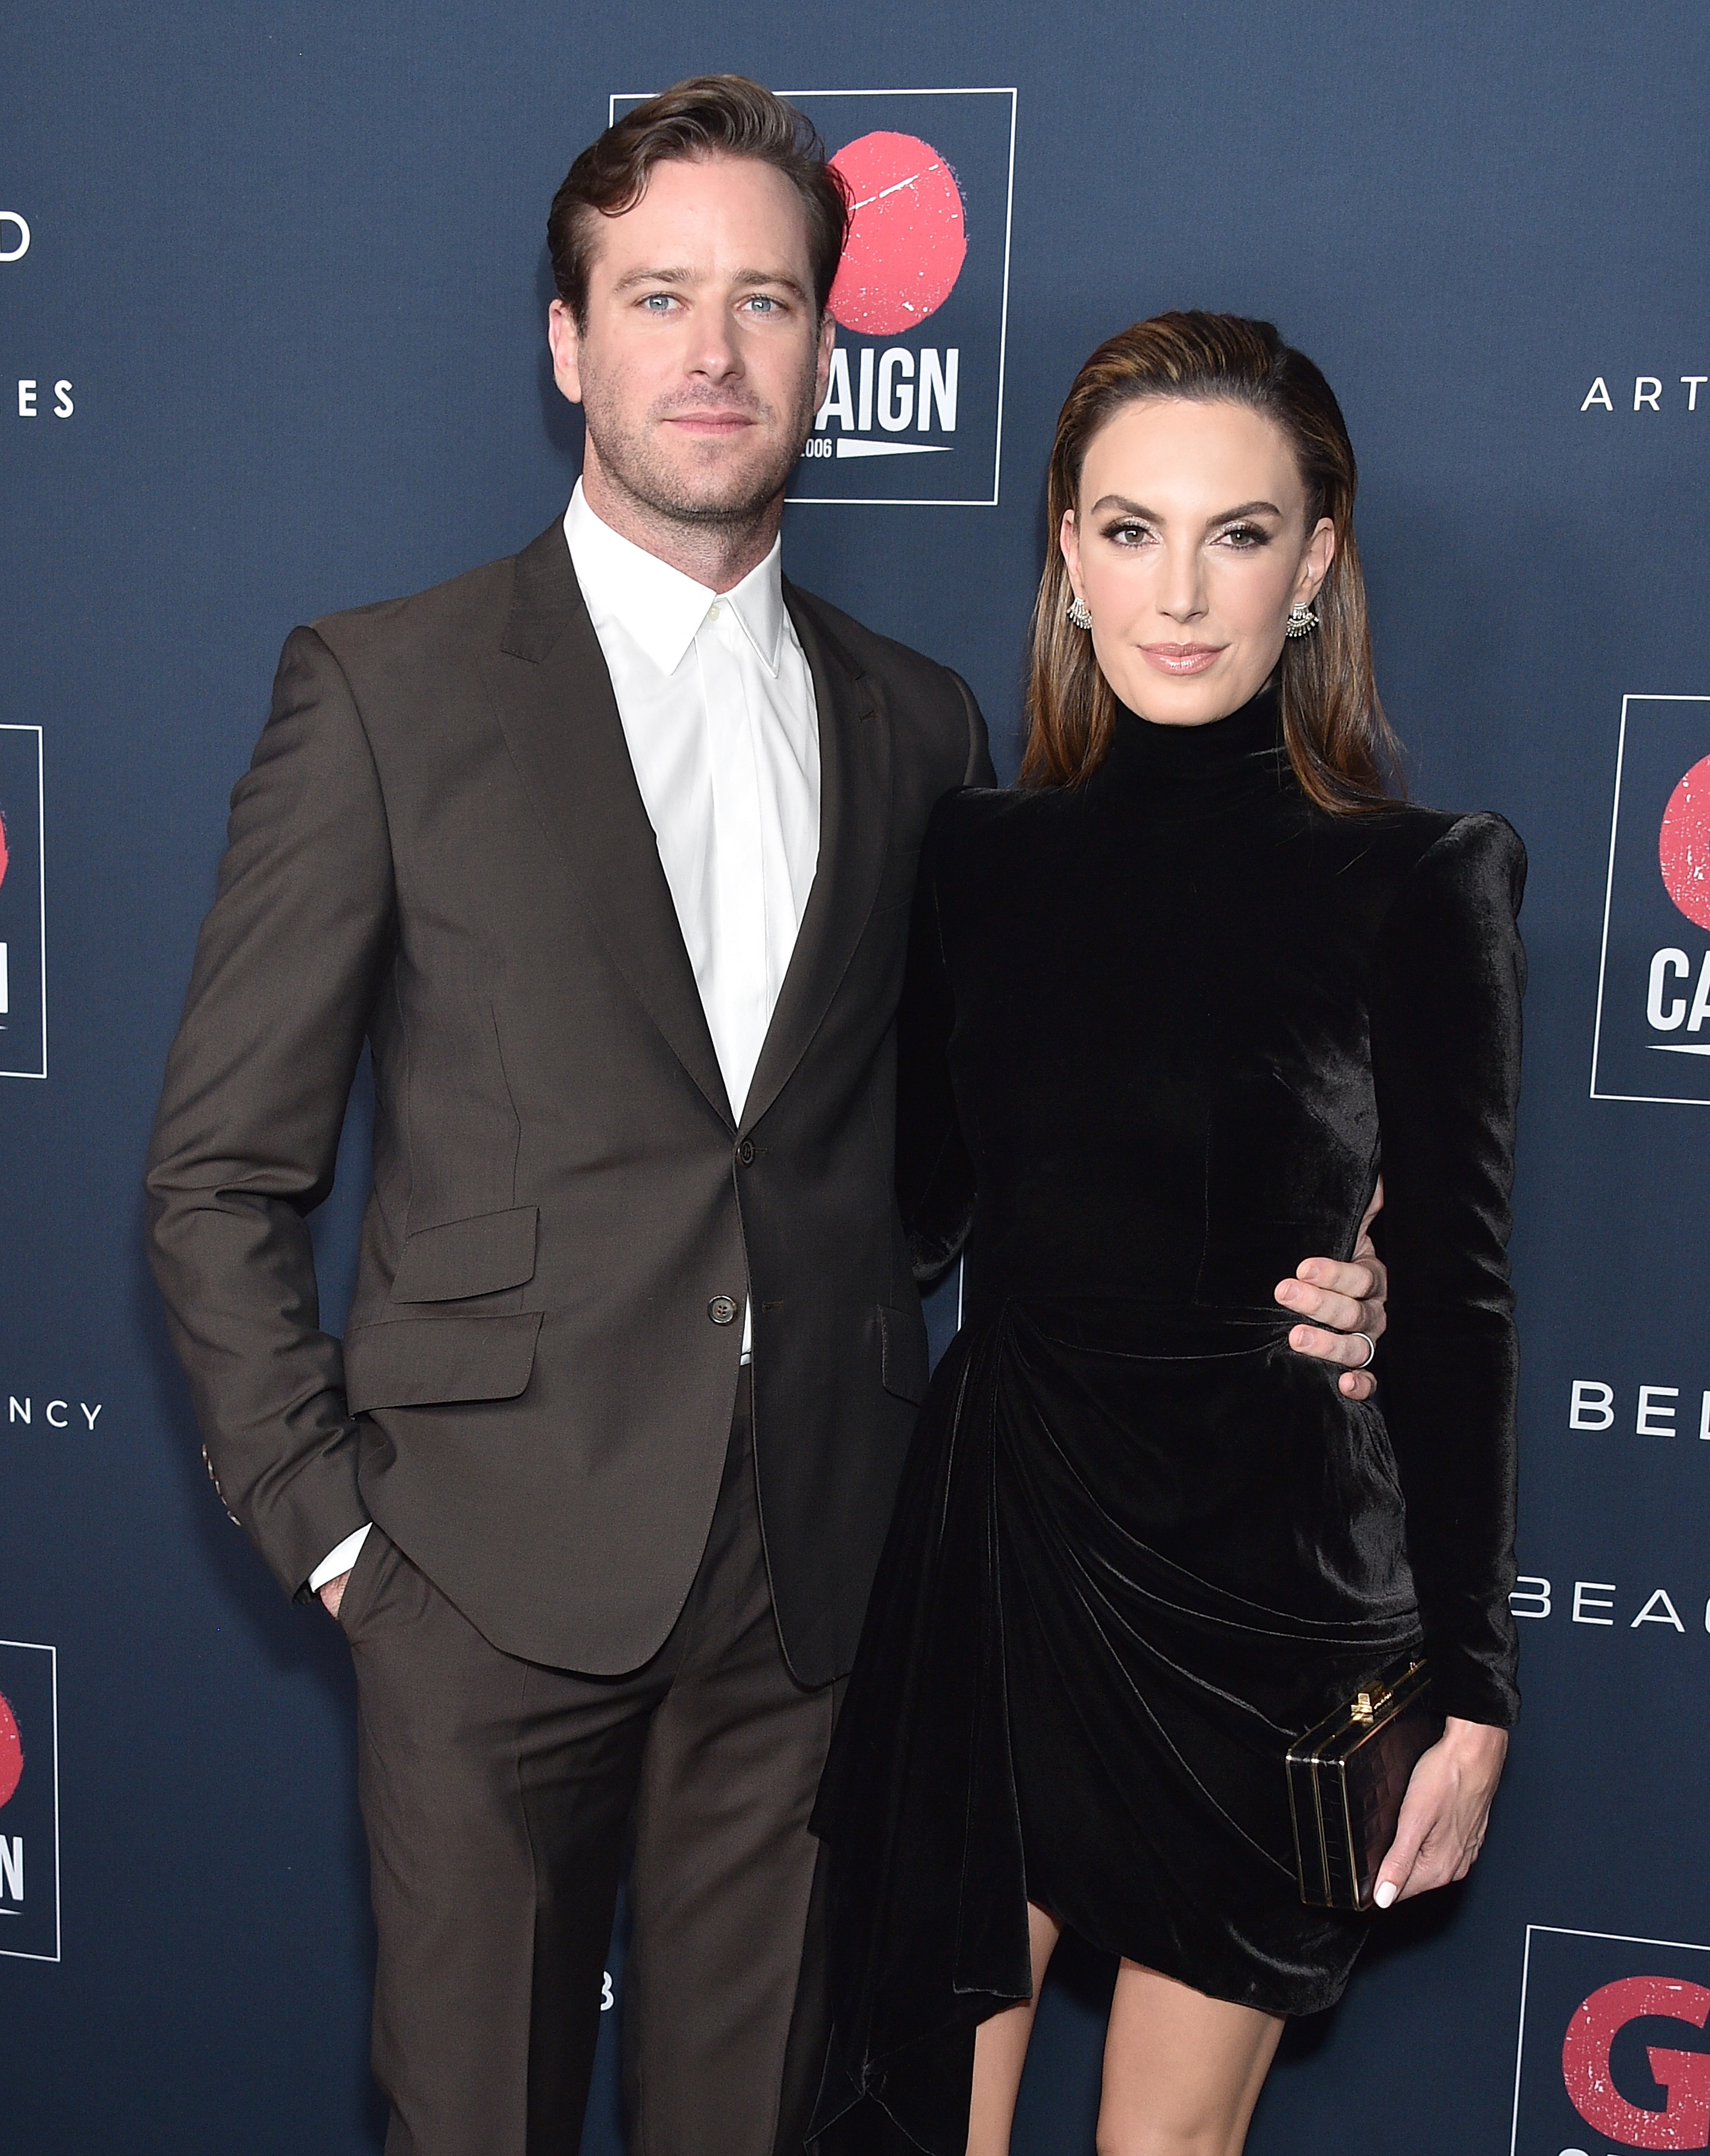 armie hammer wife allegations